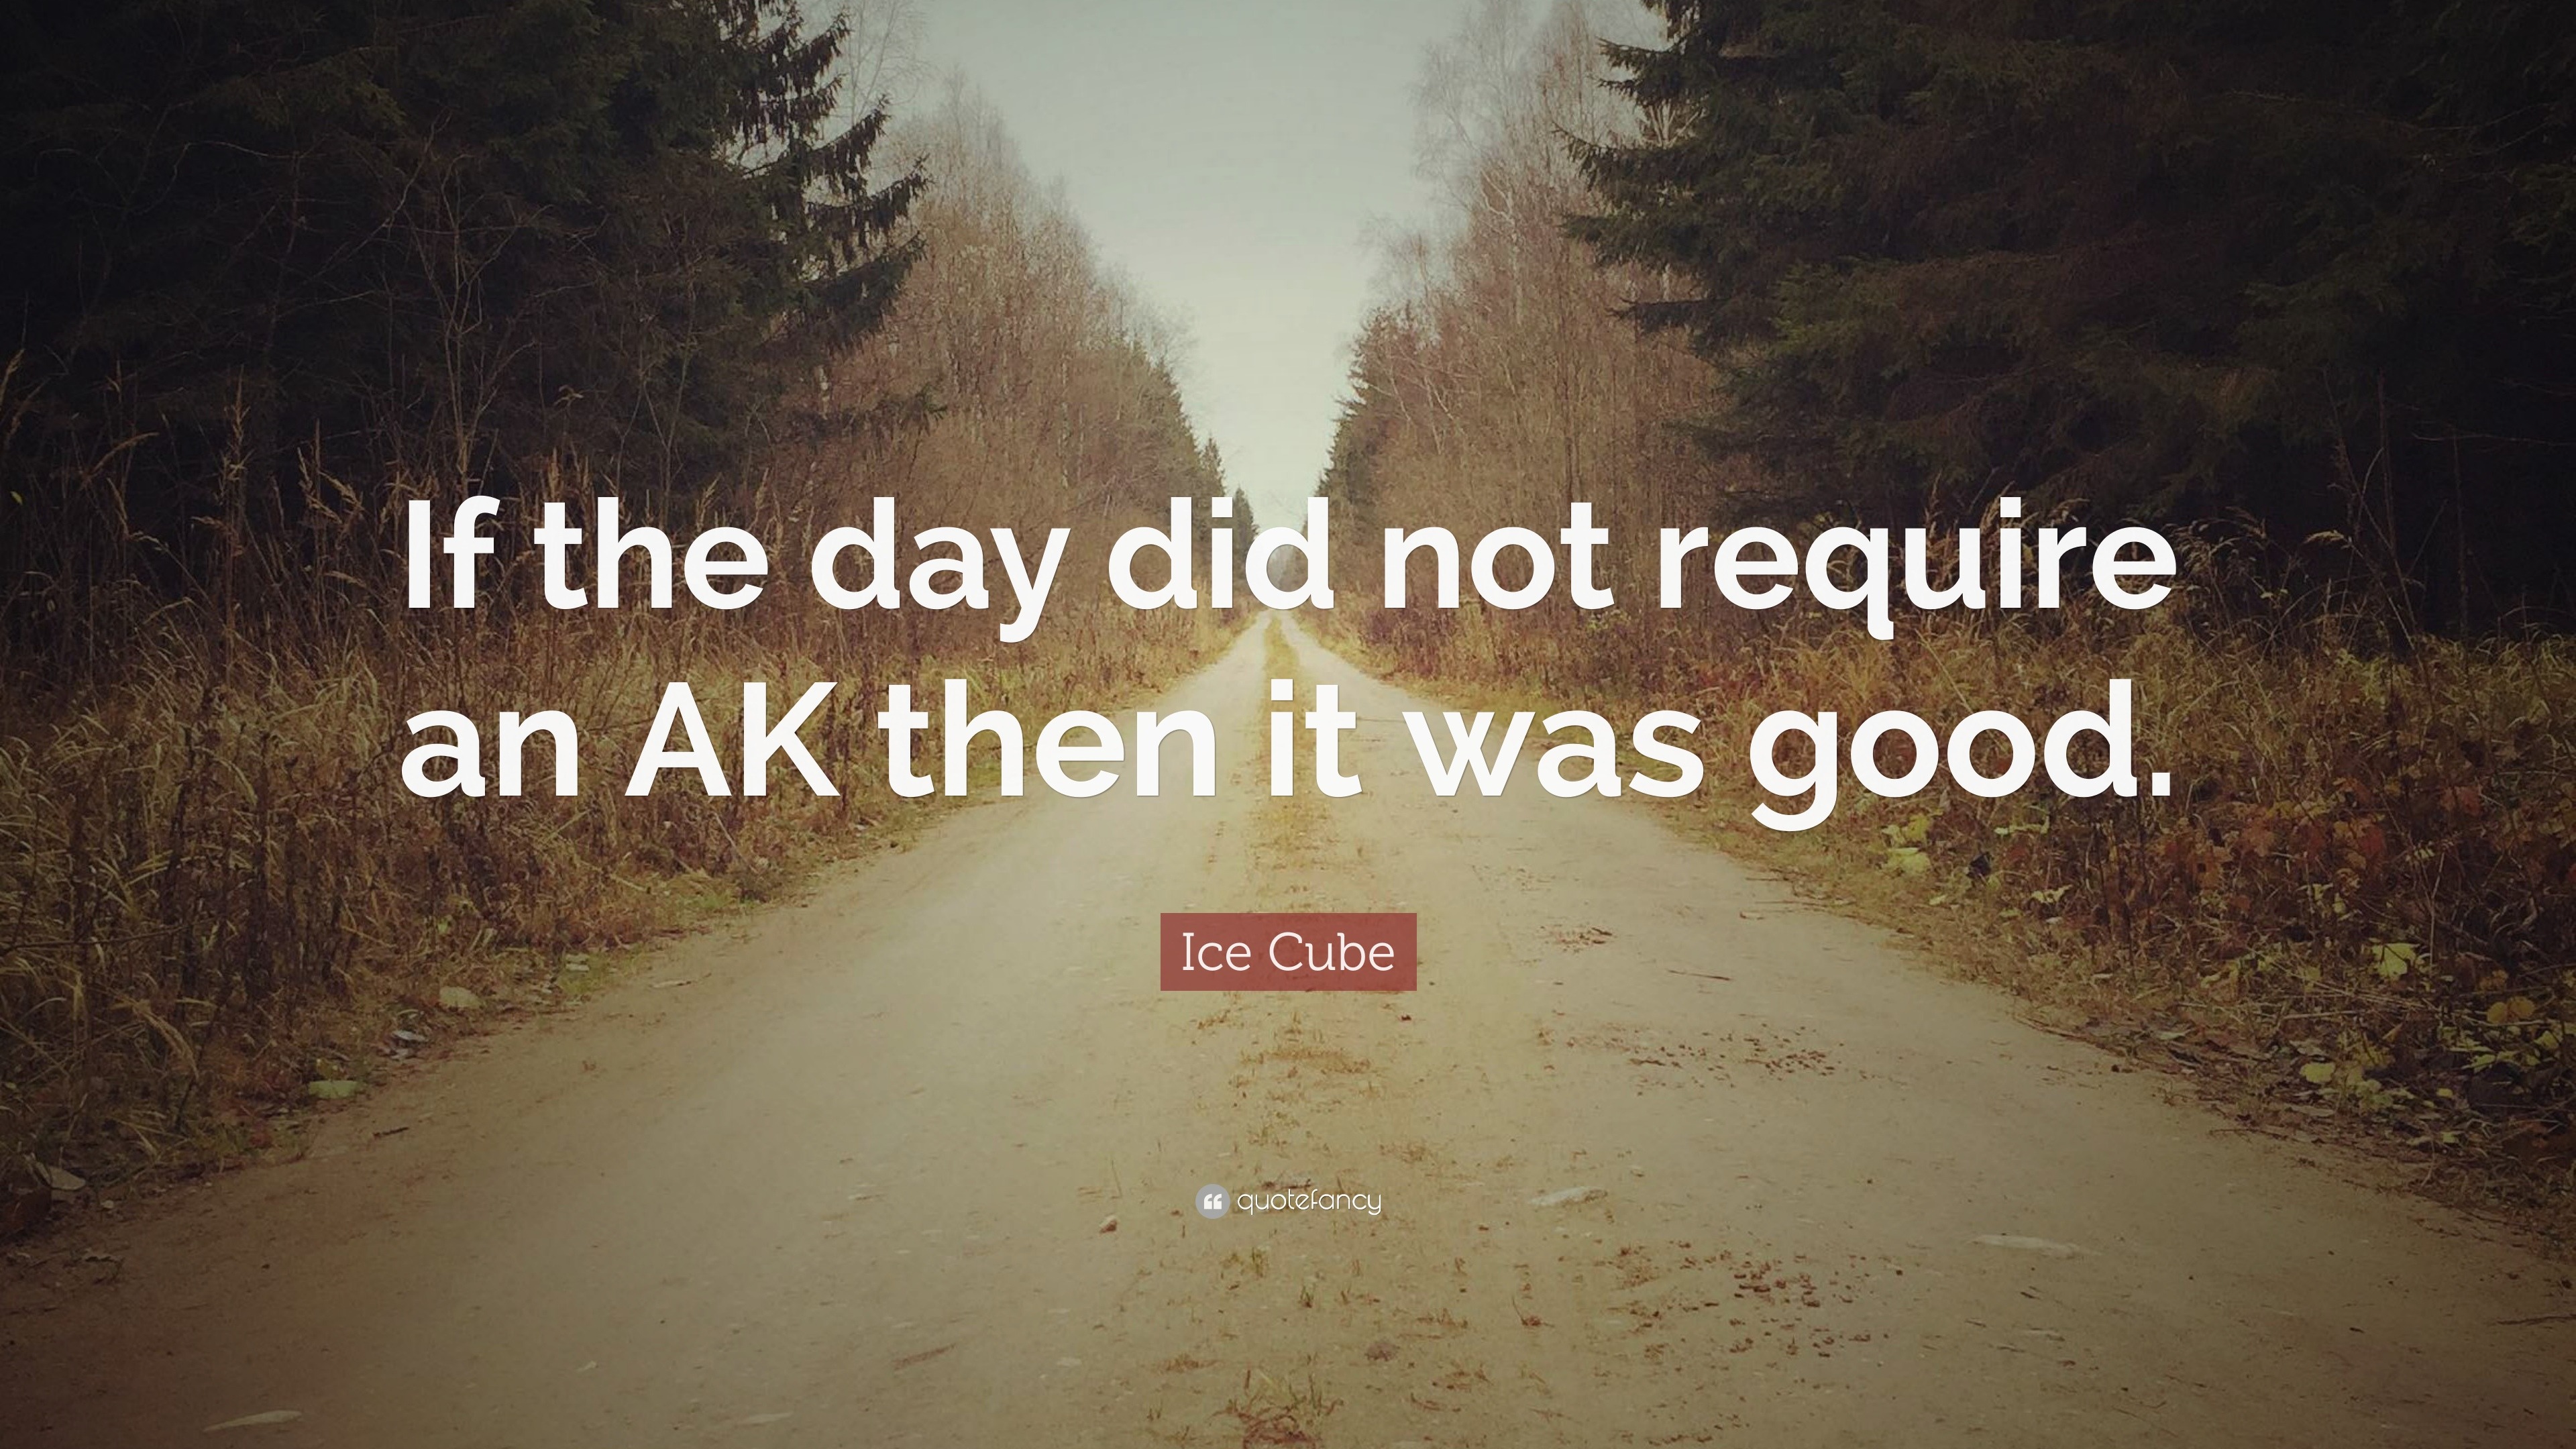 Ice Cube Quote: “If the day did not require an AK then it was good.”